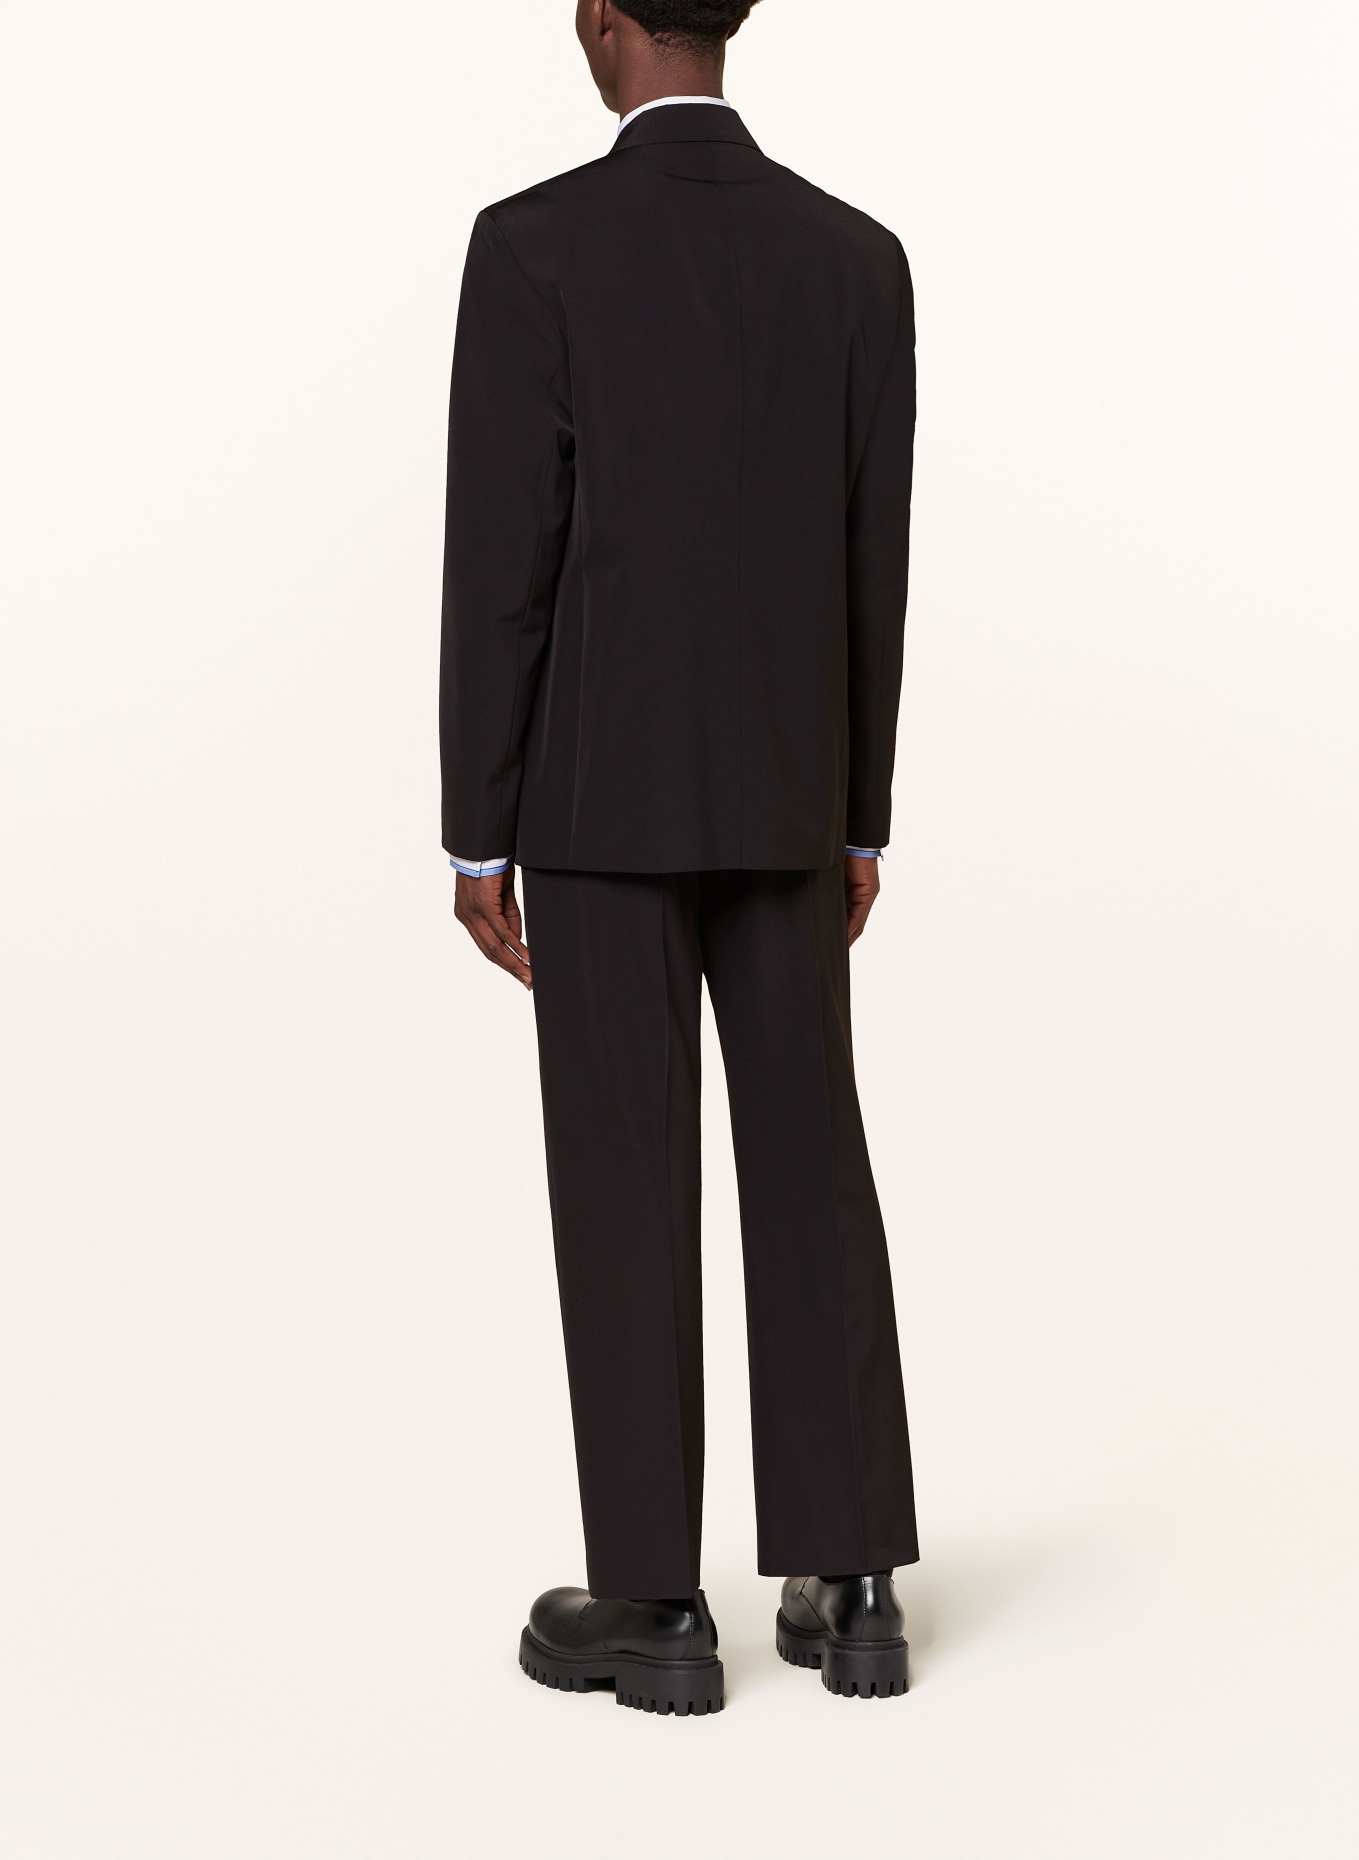 Acne Studios - Relaxed fit suit jacket - Black